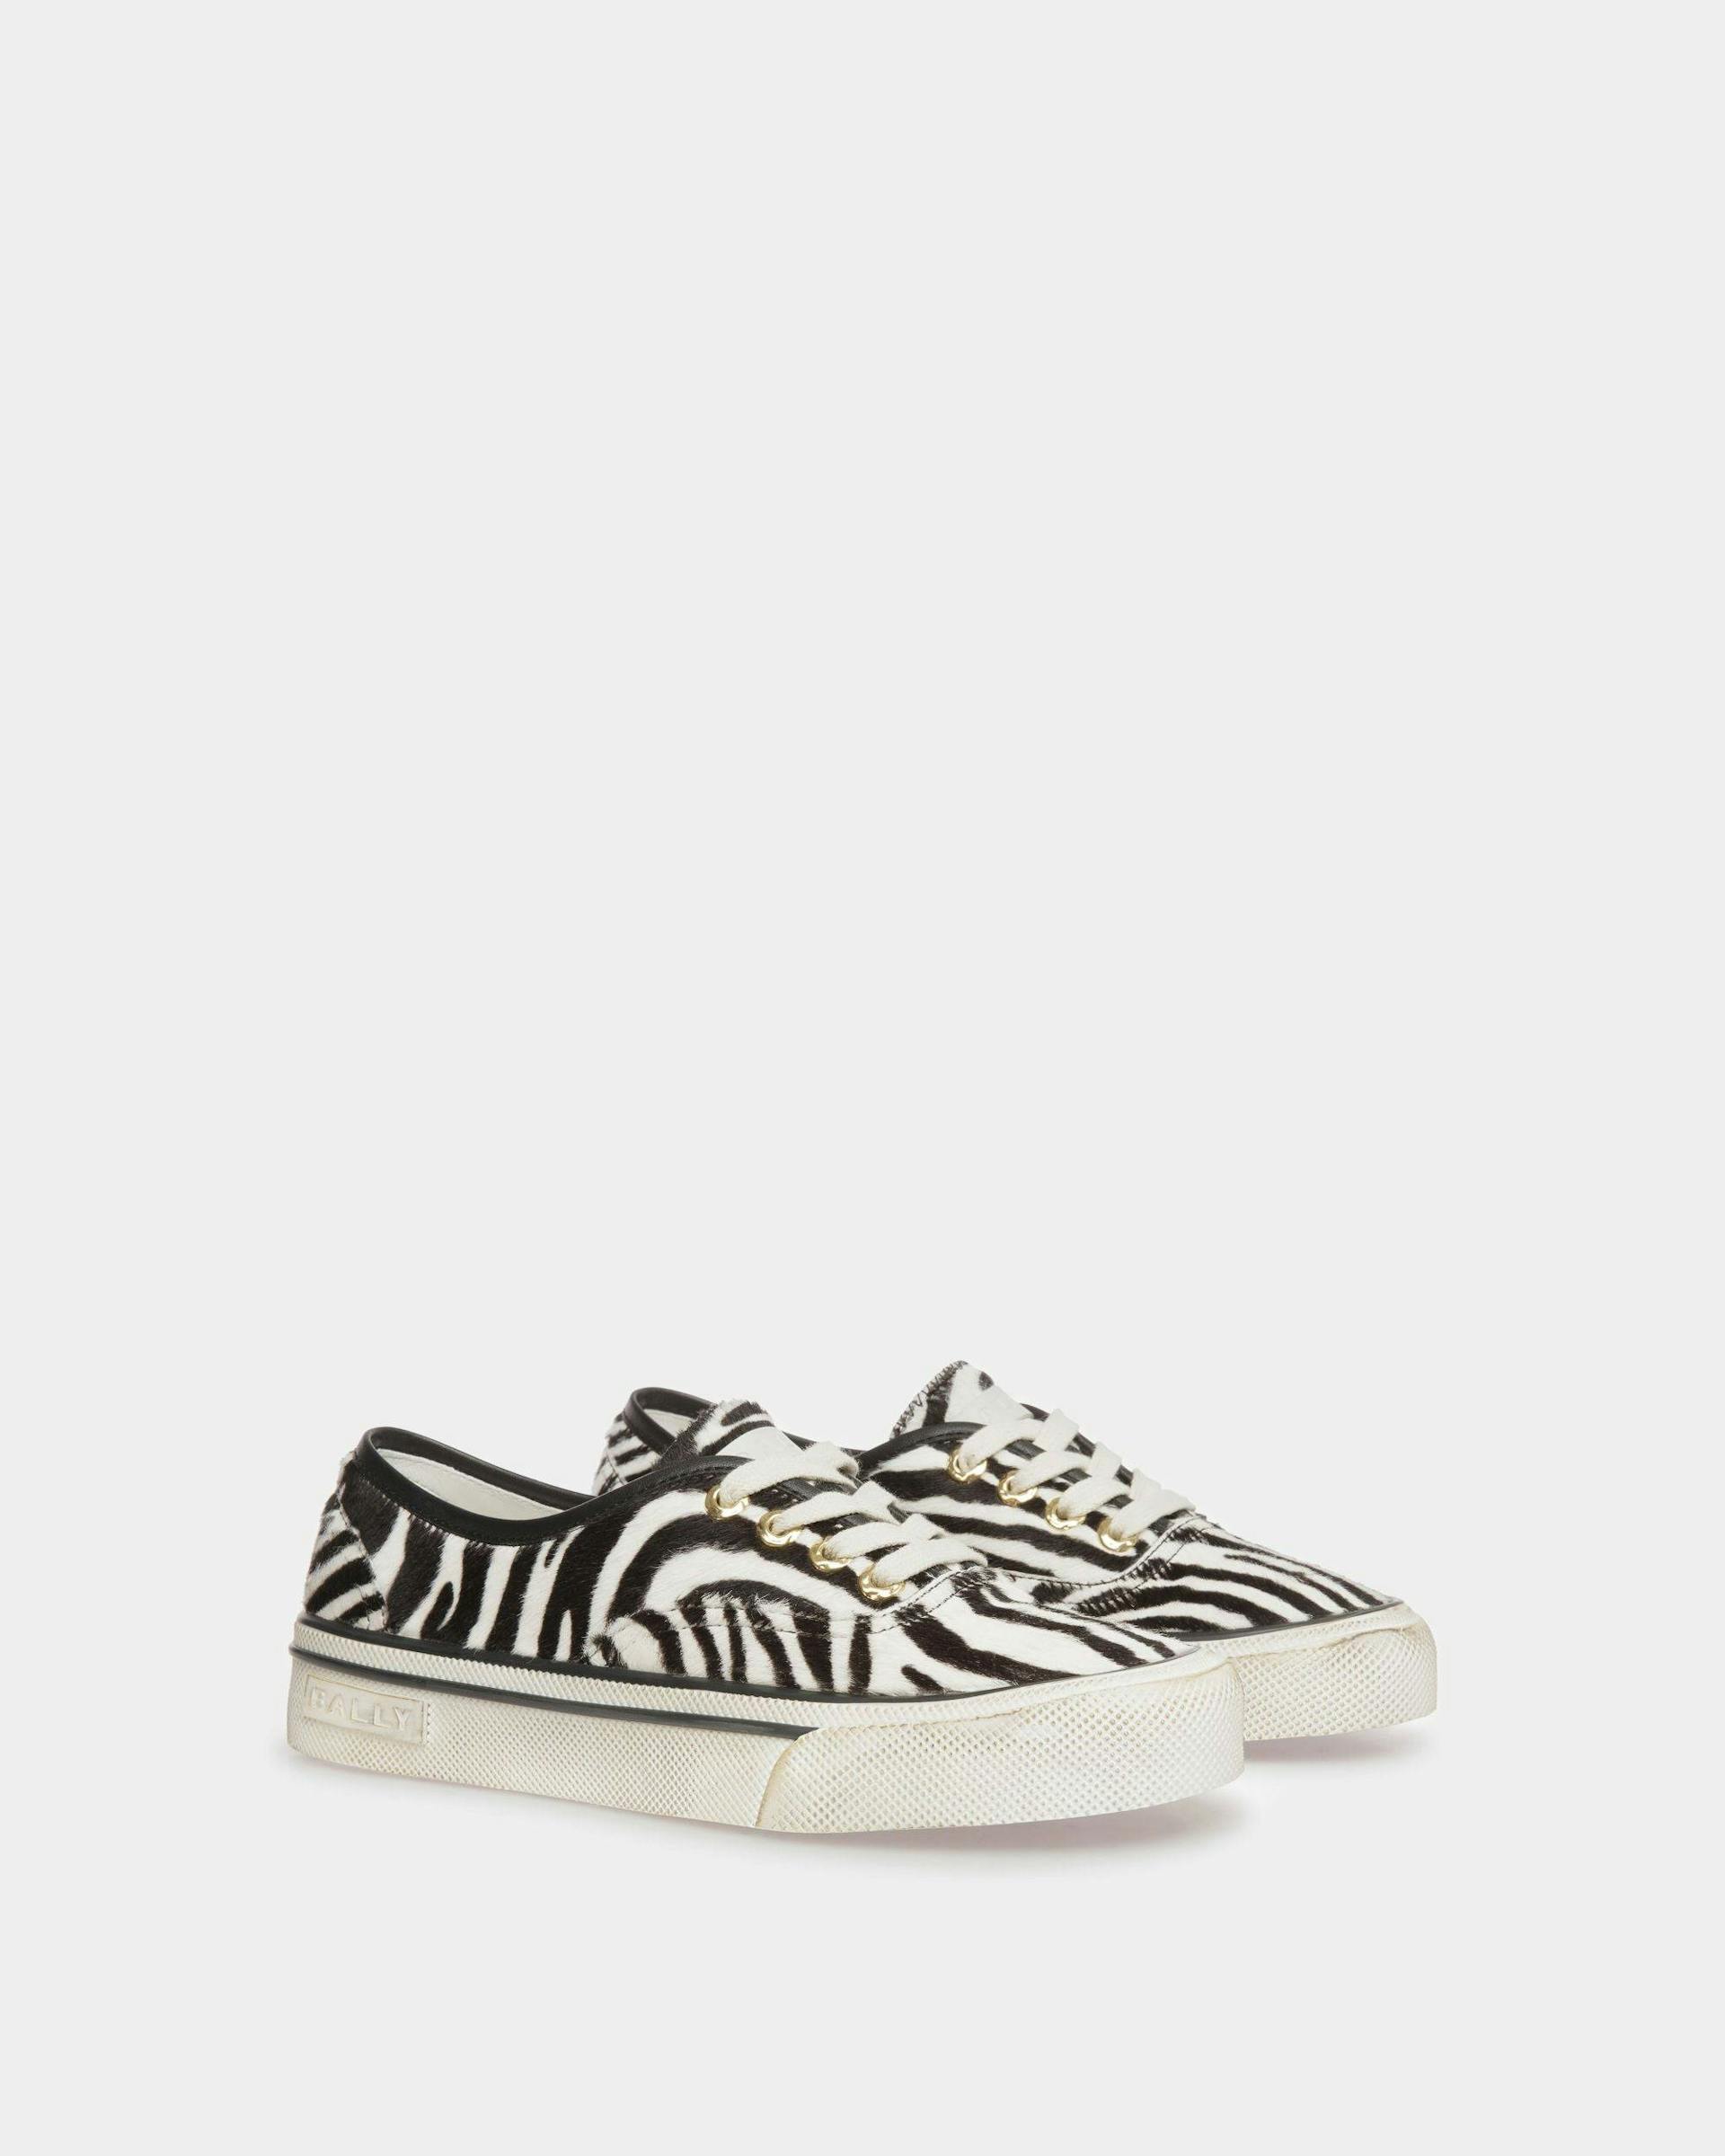 Santa Ana Sneakers In White And Black Haircalf Leather - Women's - Bally - 02